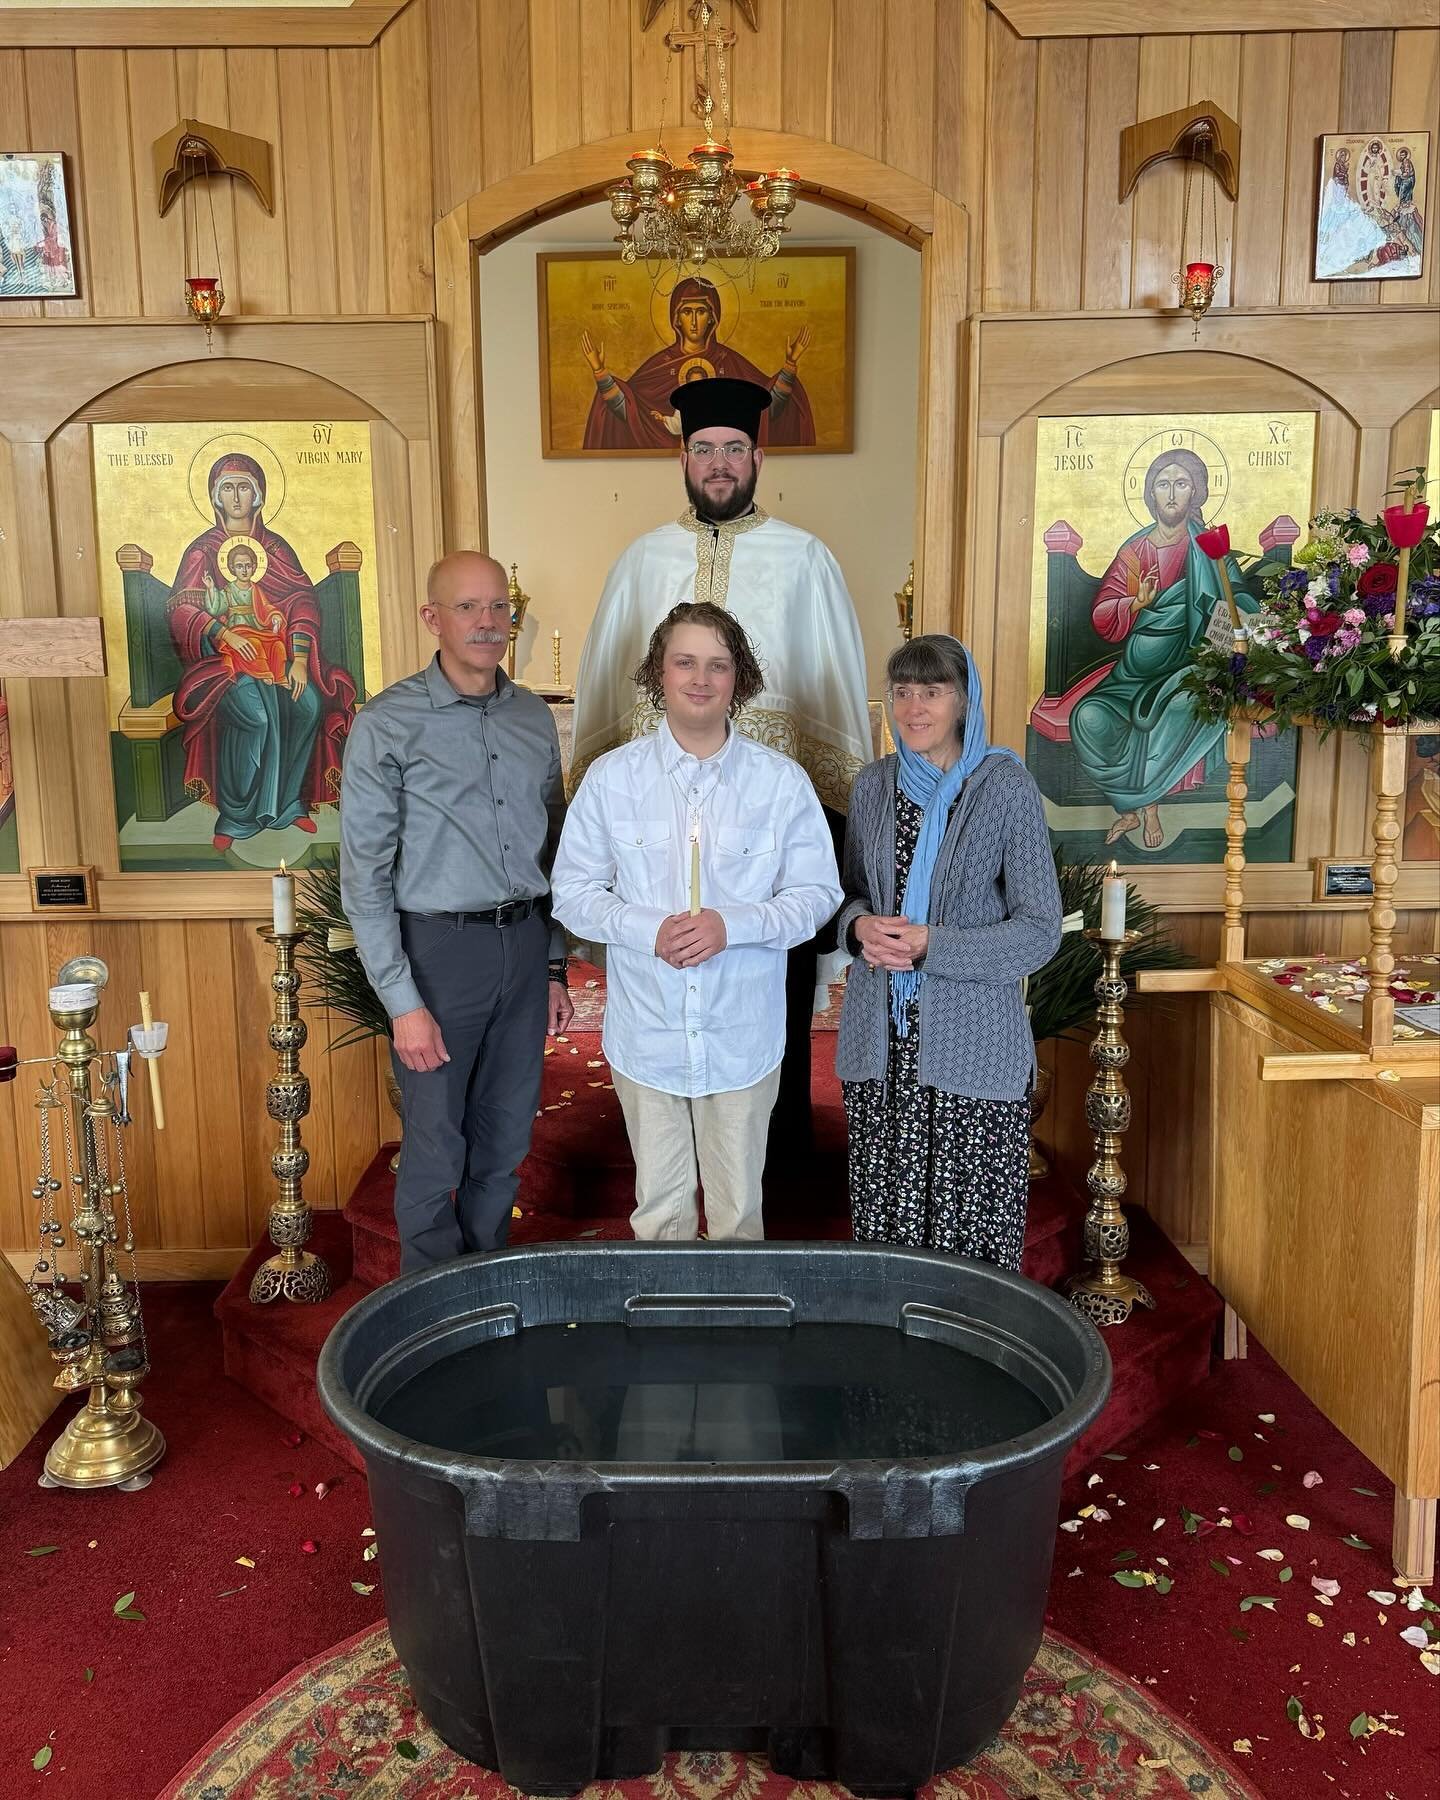 Today, following the Vesperal Liturgy, we welcomed Silouan (Samuel) into the Church. Glory to God who illumines and sanctifies everyone who comes into the world! Kali Anastasi!